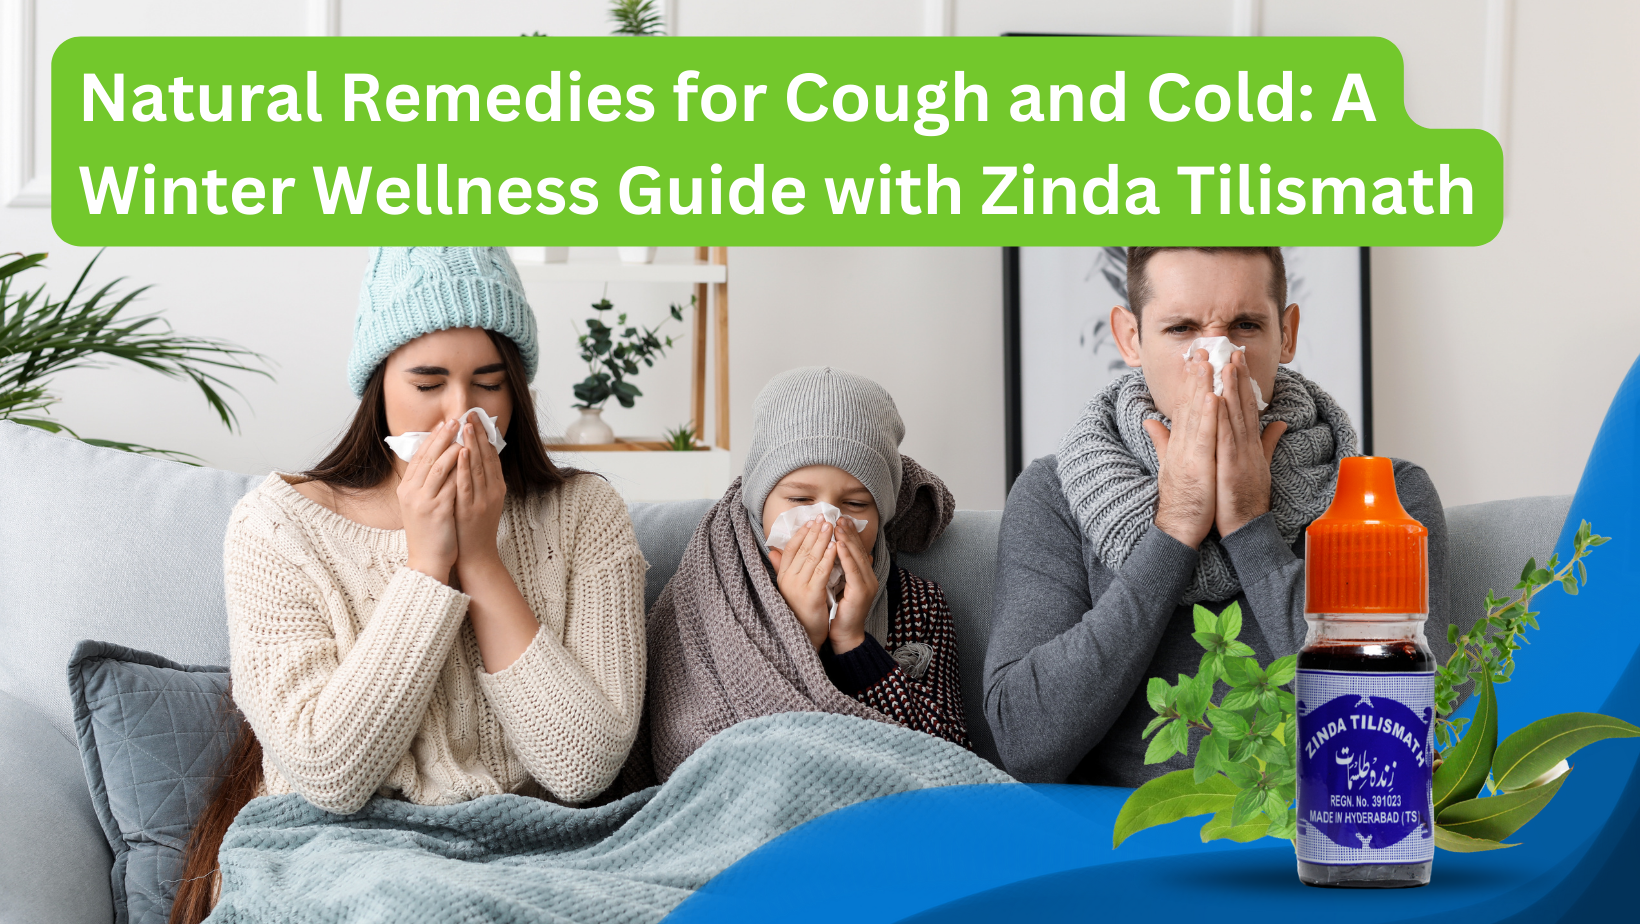 Natural Remedies for Cough and Cold: A Winter Wellness Guide with Zinda Tilismath